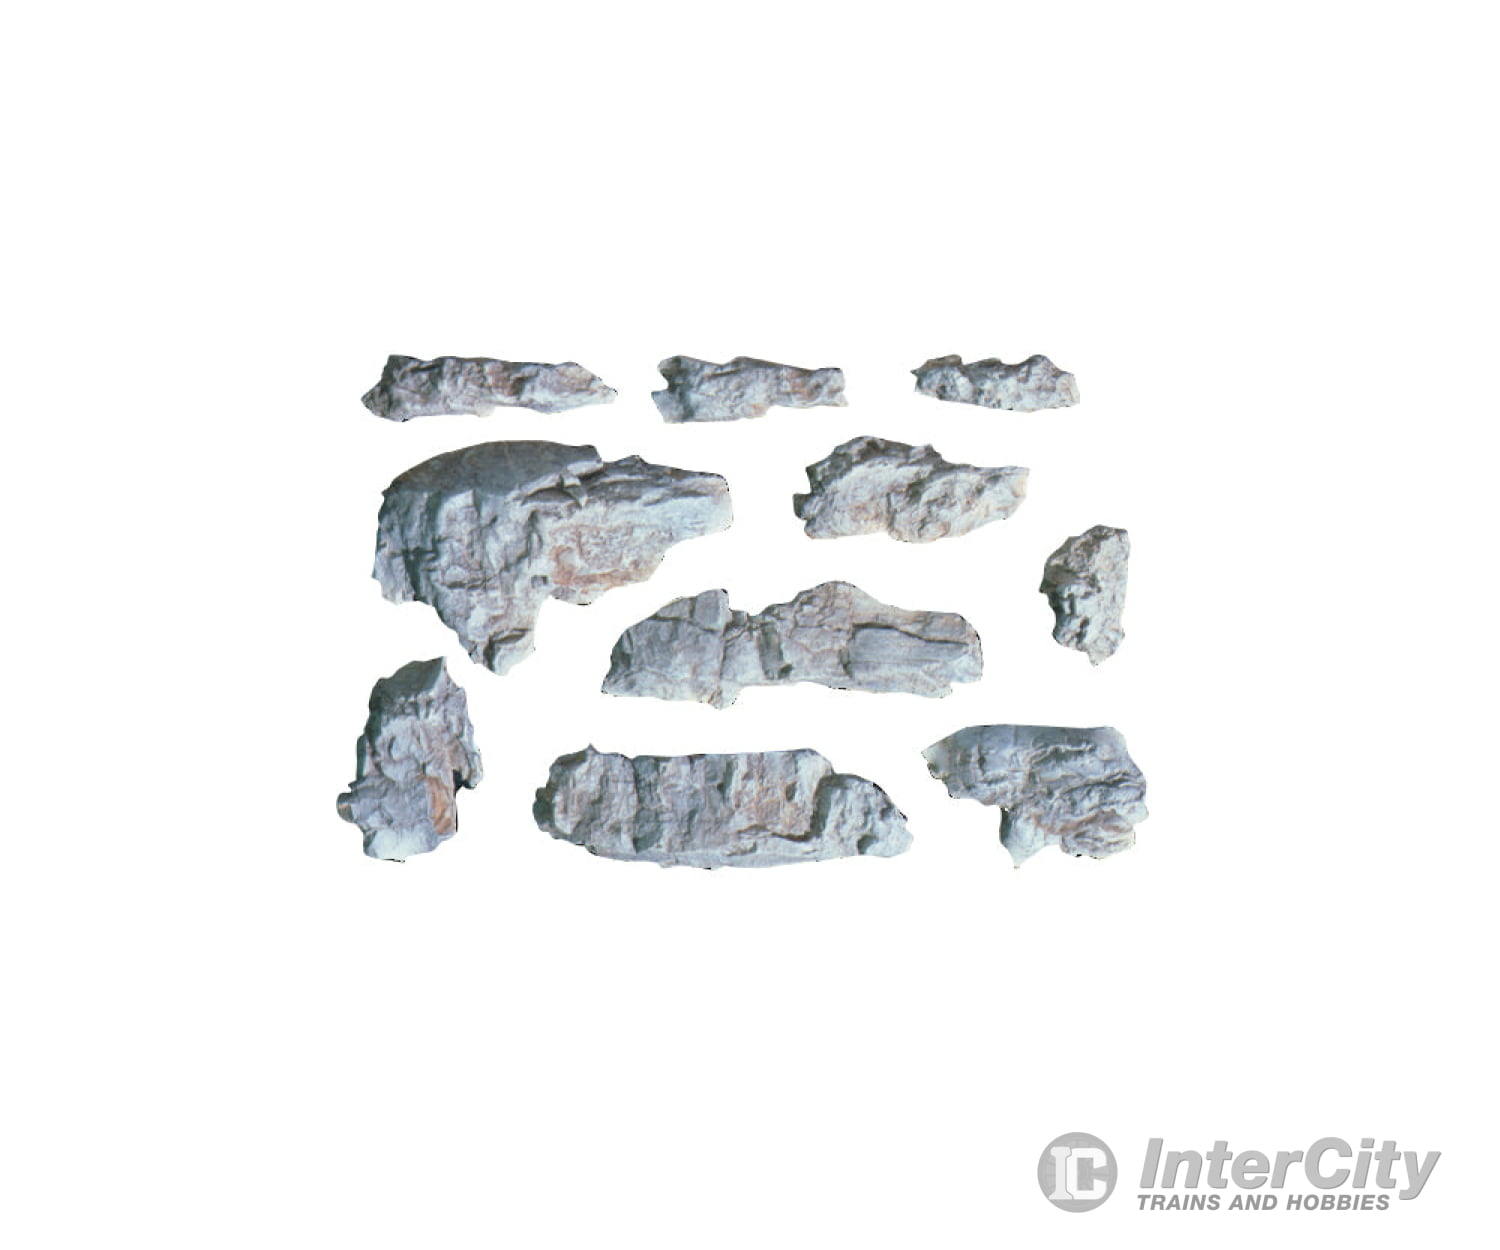 Woodland Scenics 1230 Mold - Outcoppings Rocks & Landforms